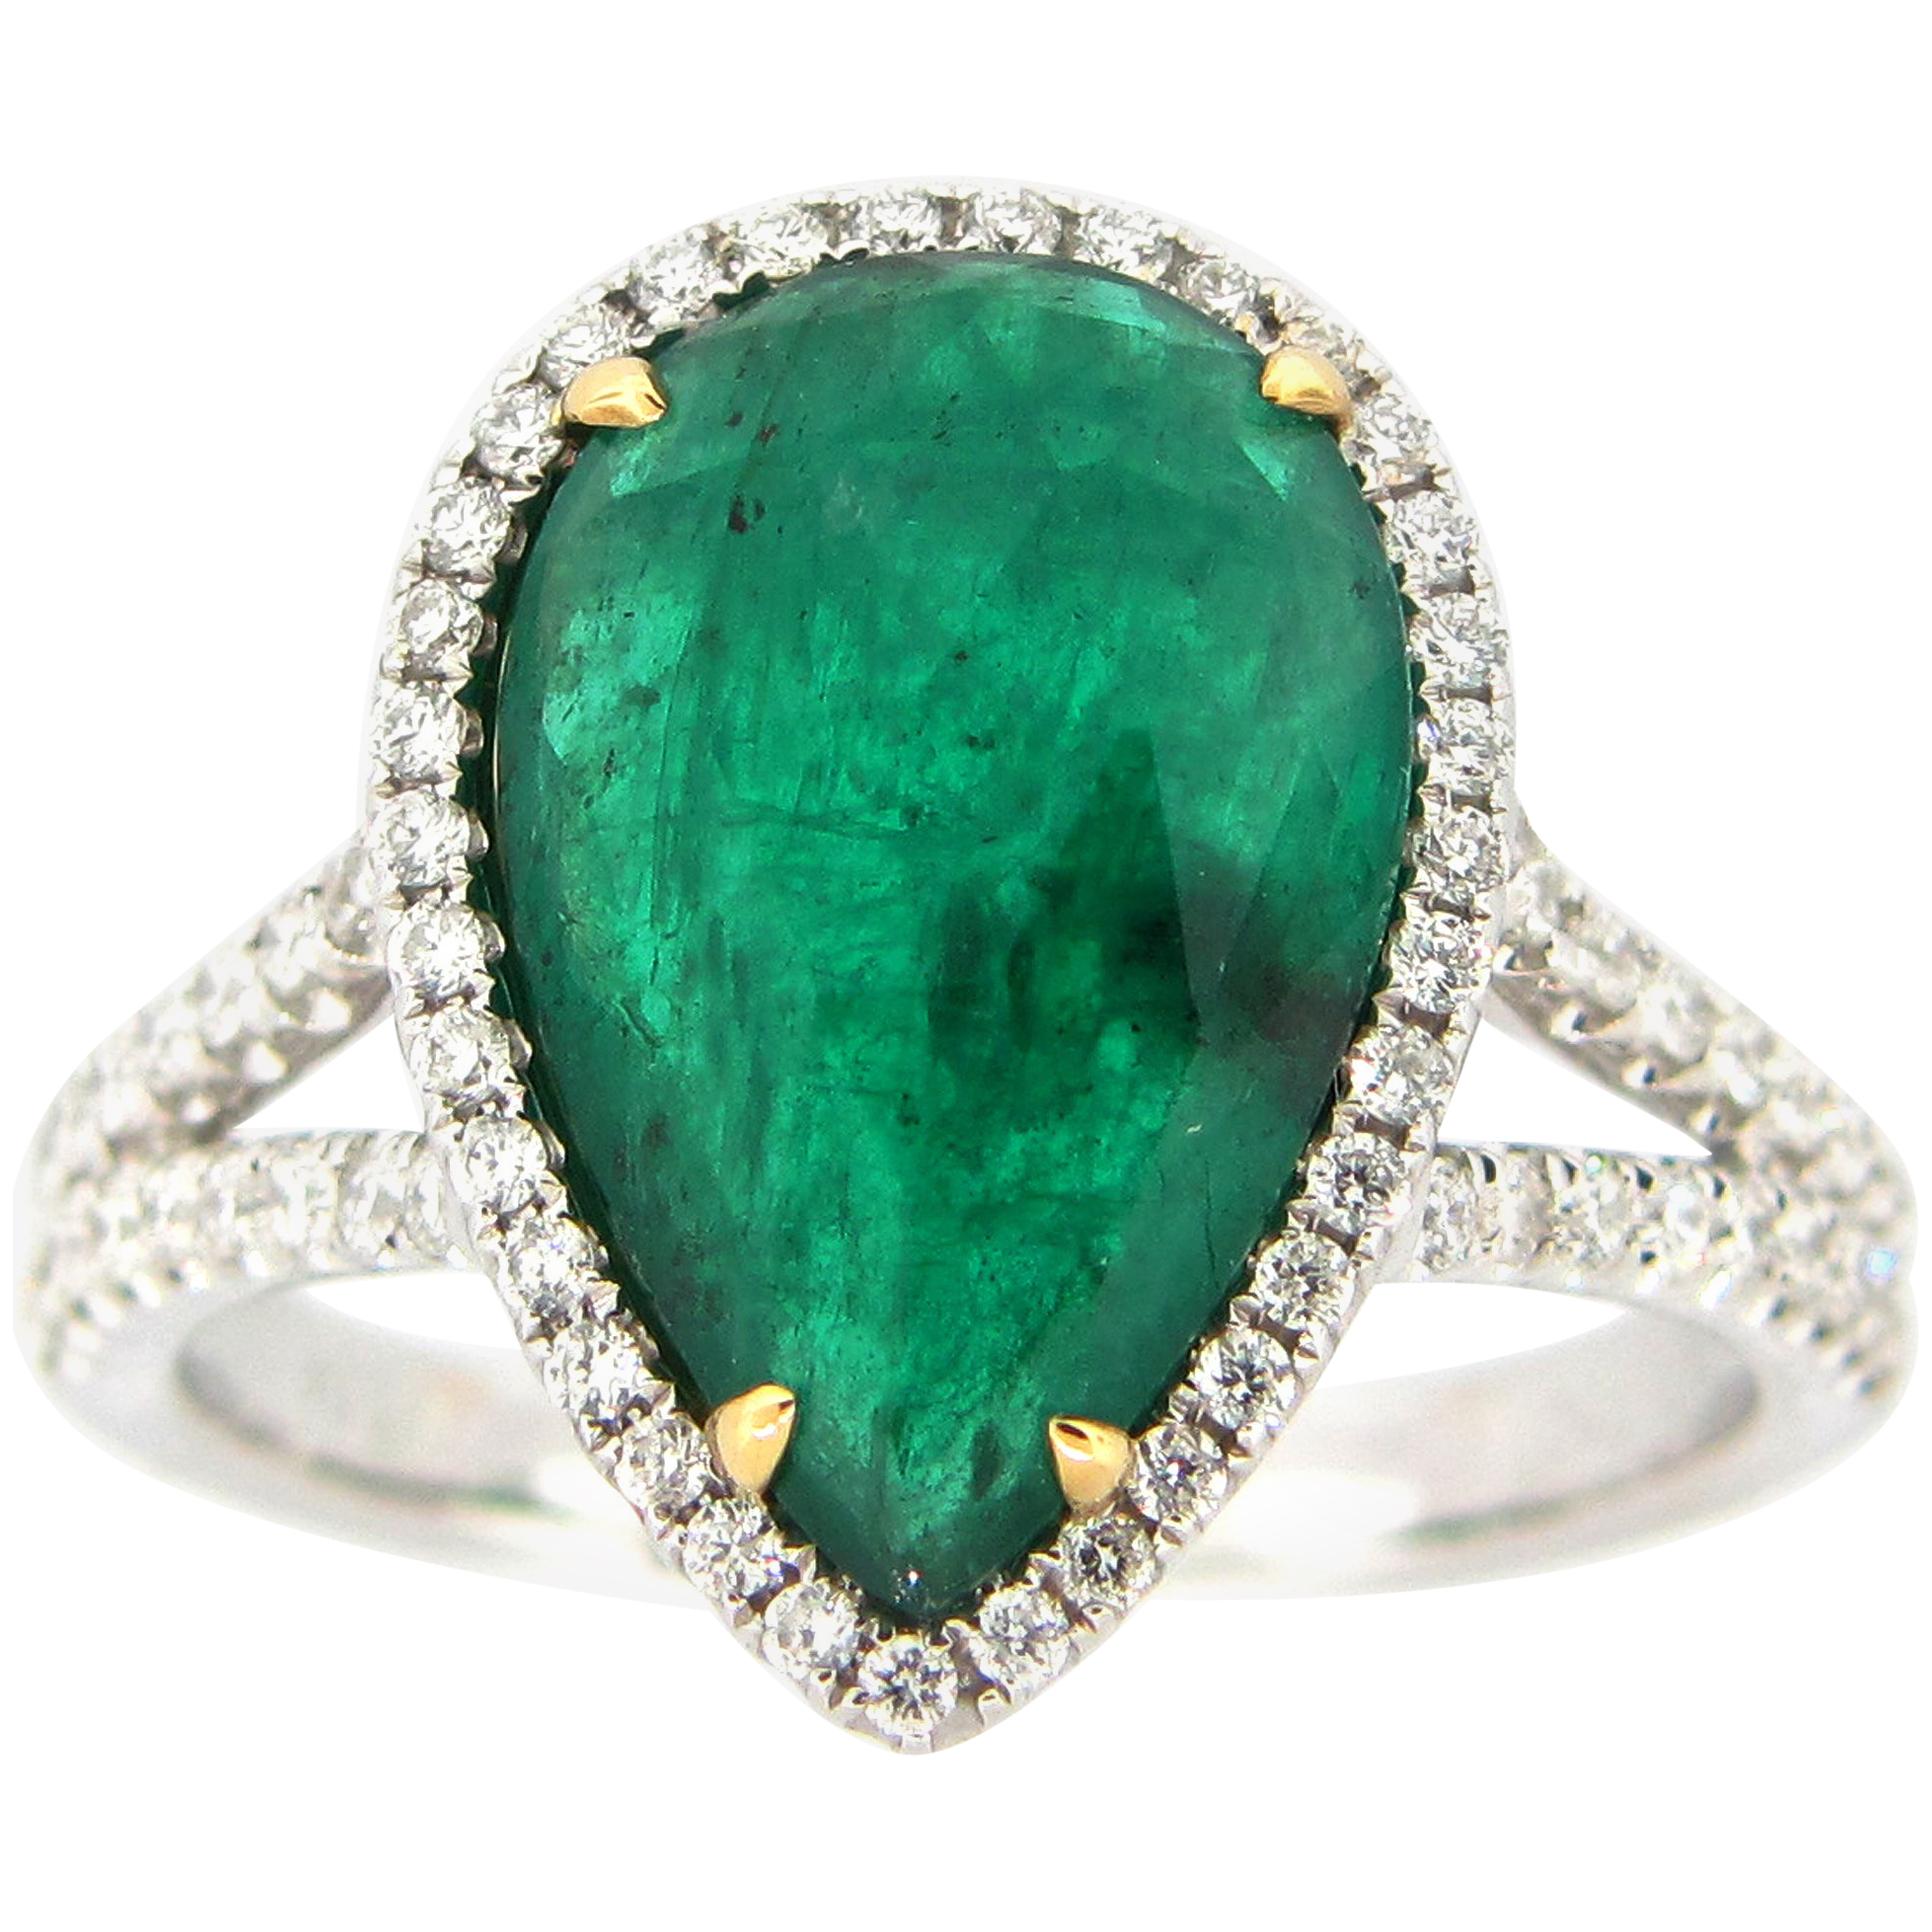 3.84 Carat Emerald and Diamond Cocktail Ring